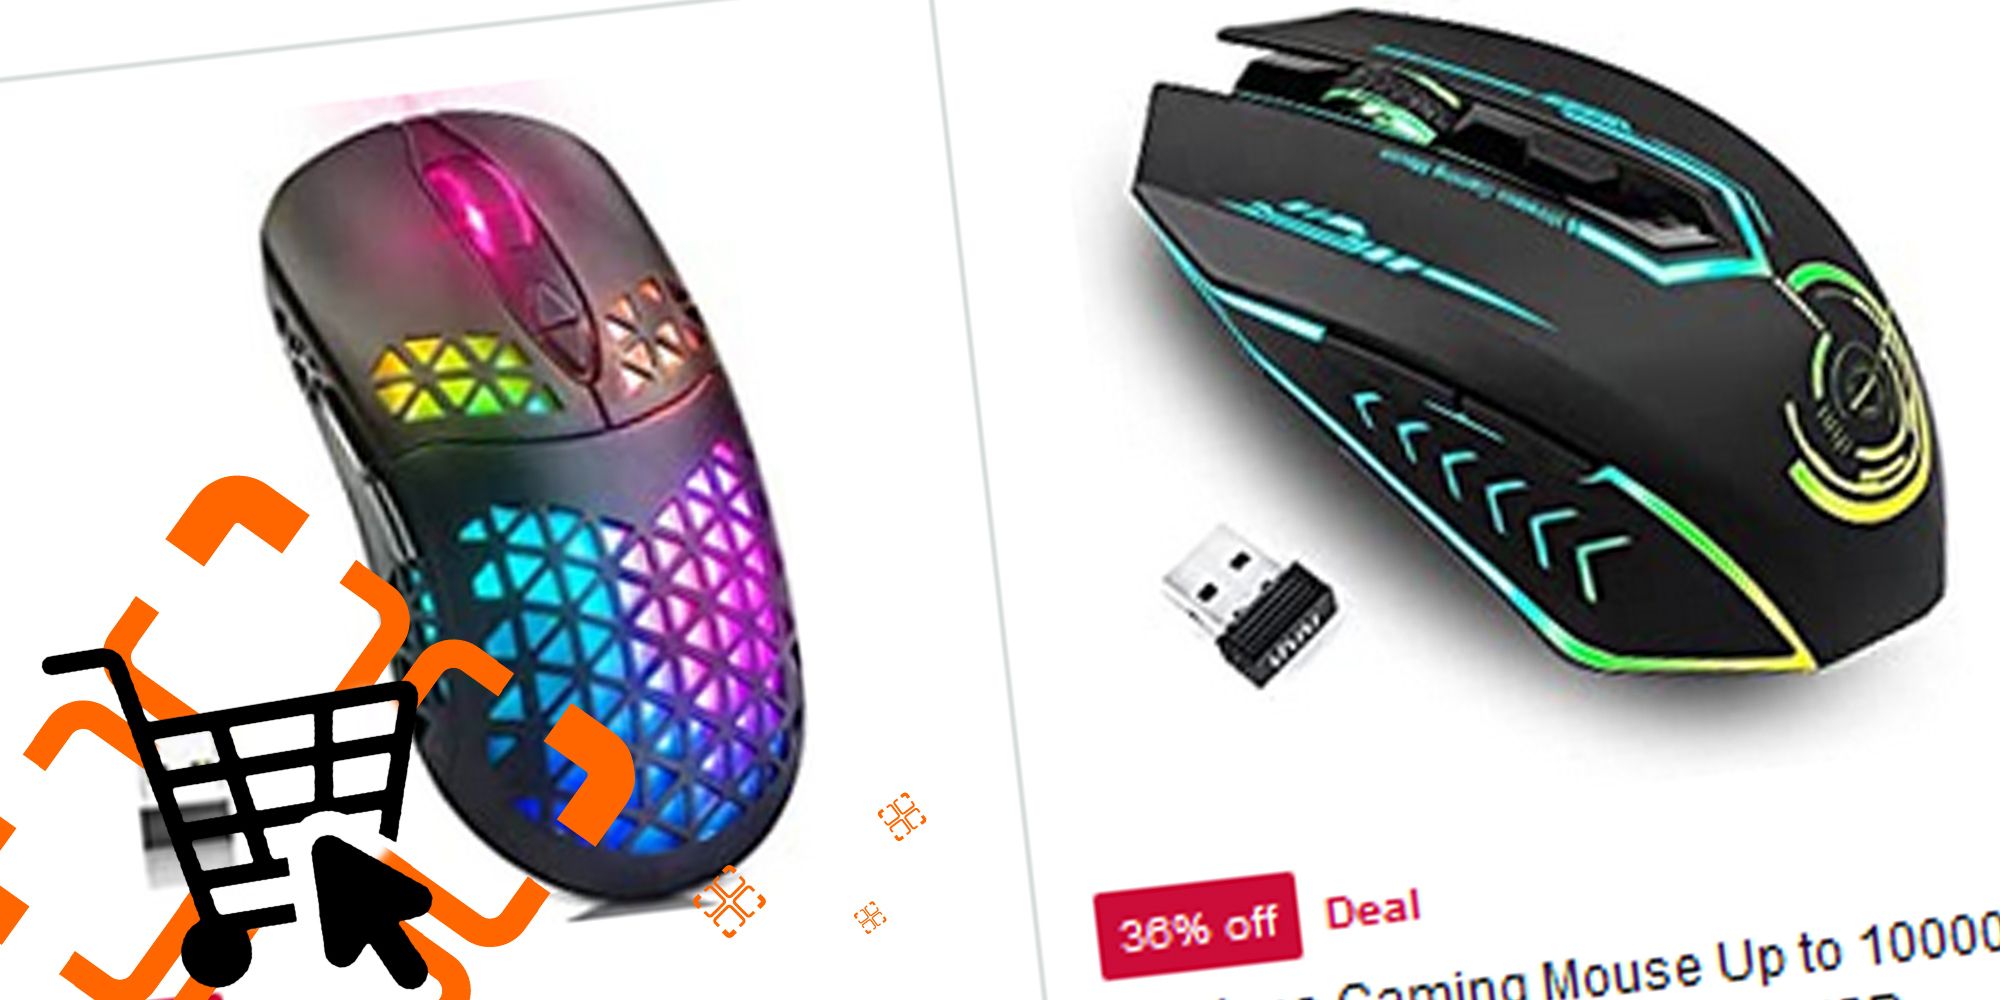 PC mice discounted in Amazon's sale.